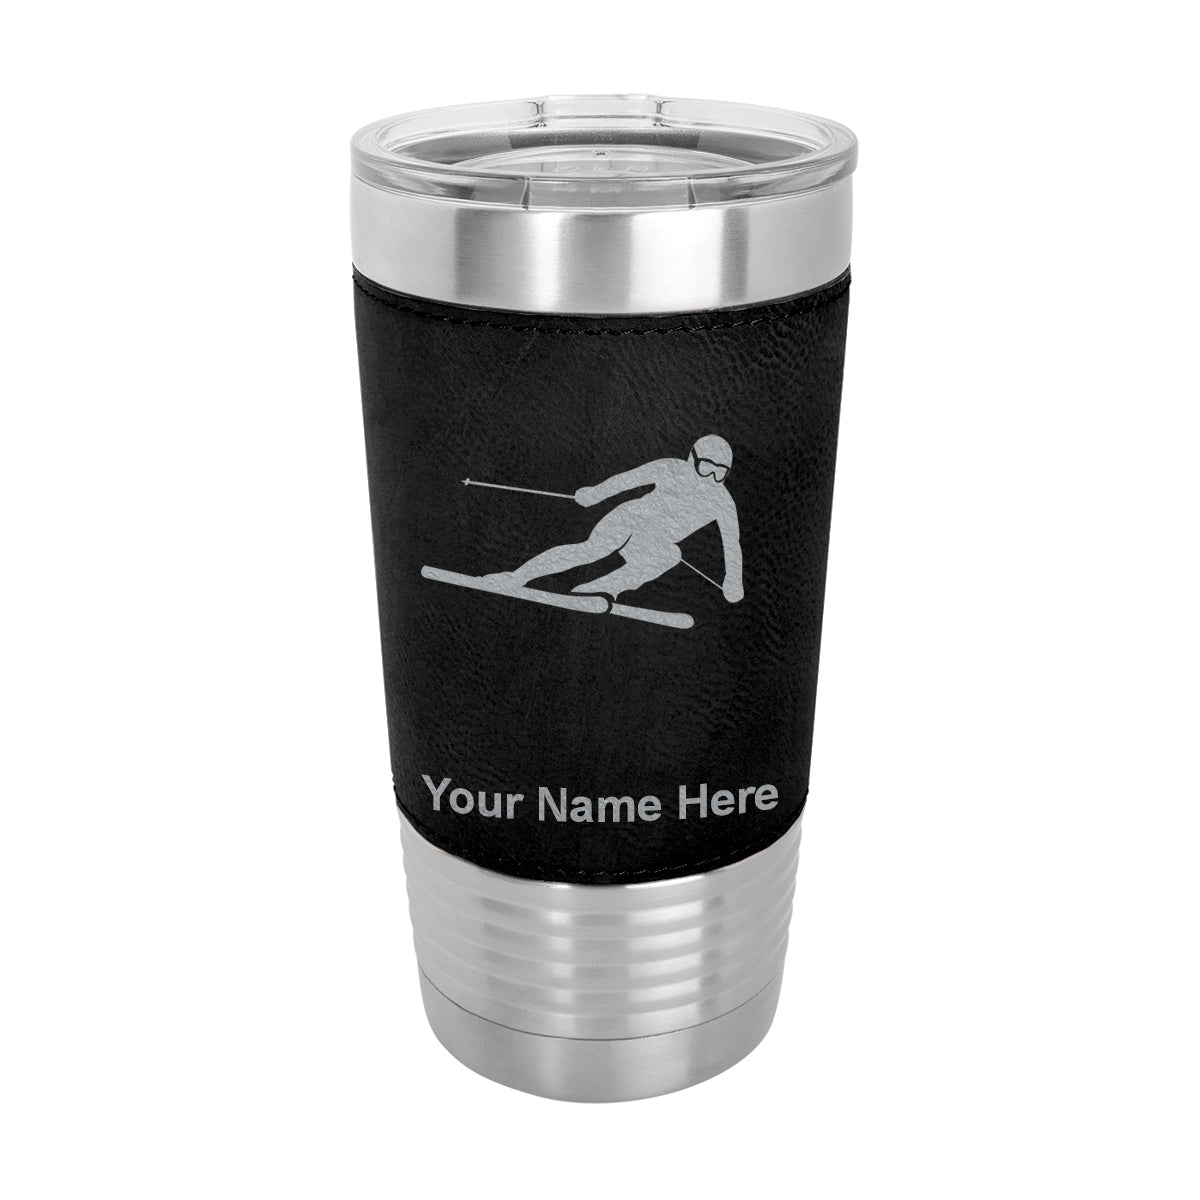 20oz Faux Leather Tumbler Mug, Skier Downhill, Personalized Engraving Included - LaserGram Custom Engraved Gifts